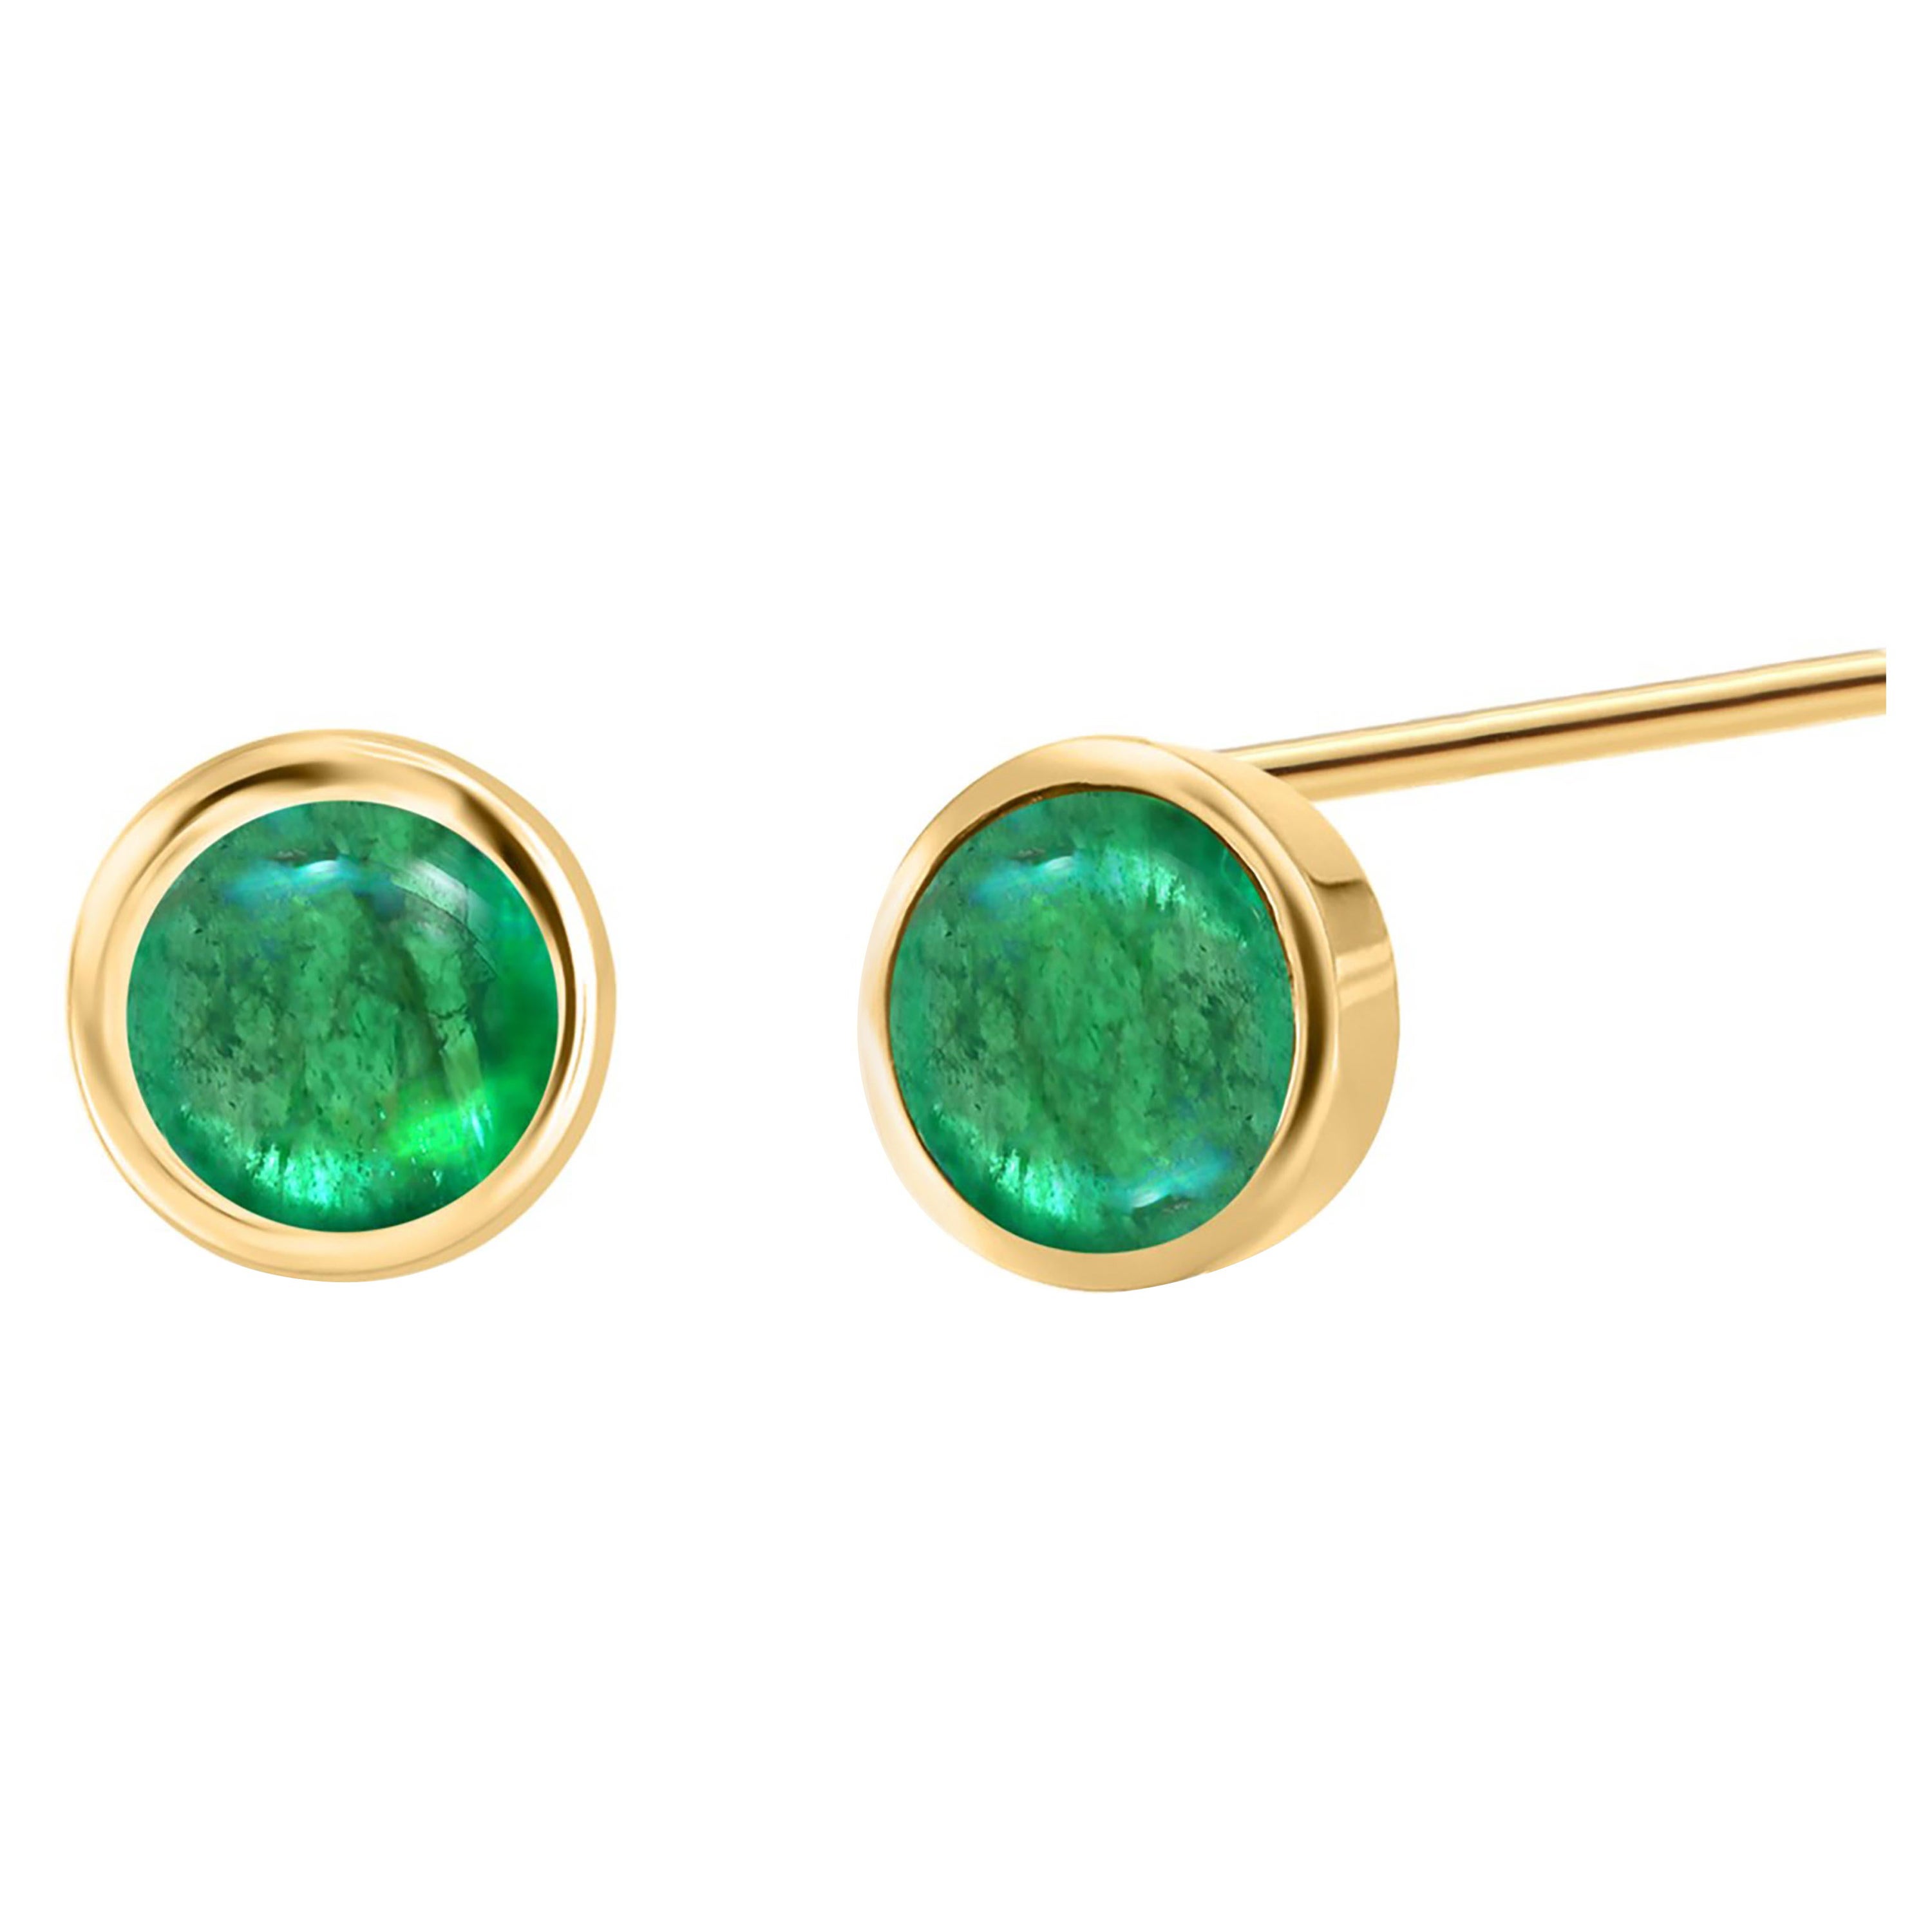 Matched Cabochon Emerald 1.10 Carat Bezel Set Yellow Gold 0.25 Inch Earrings